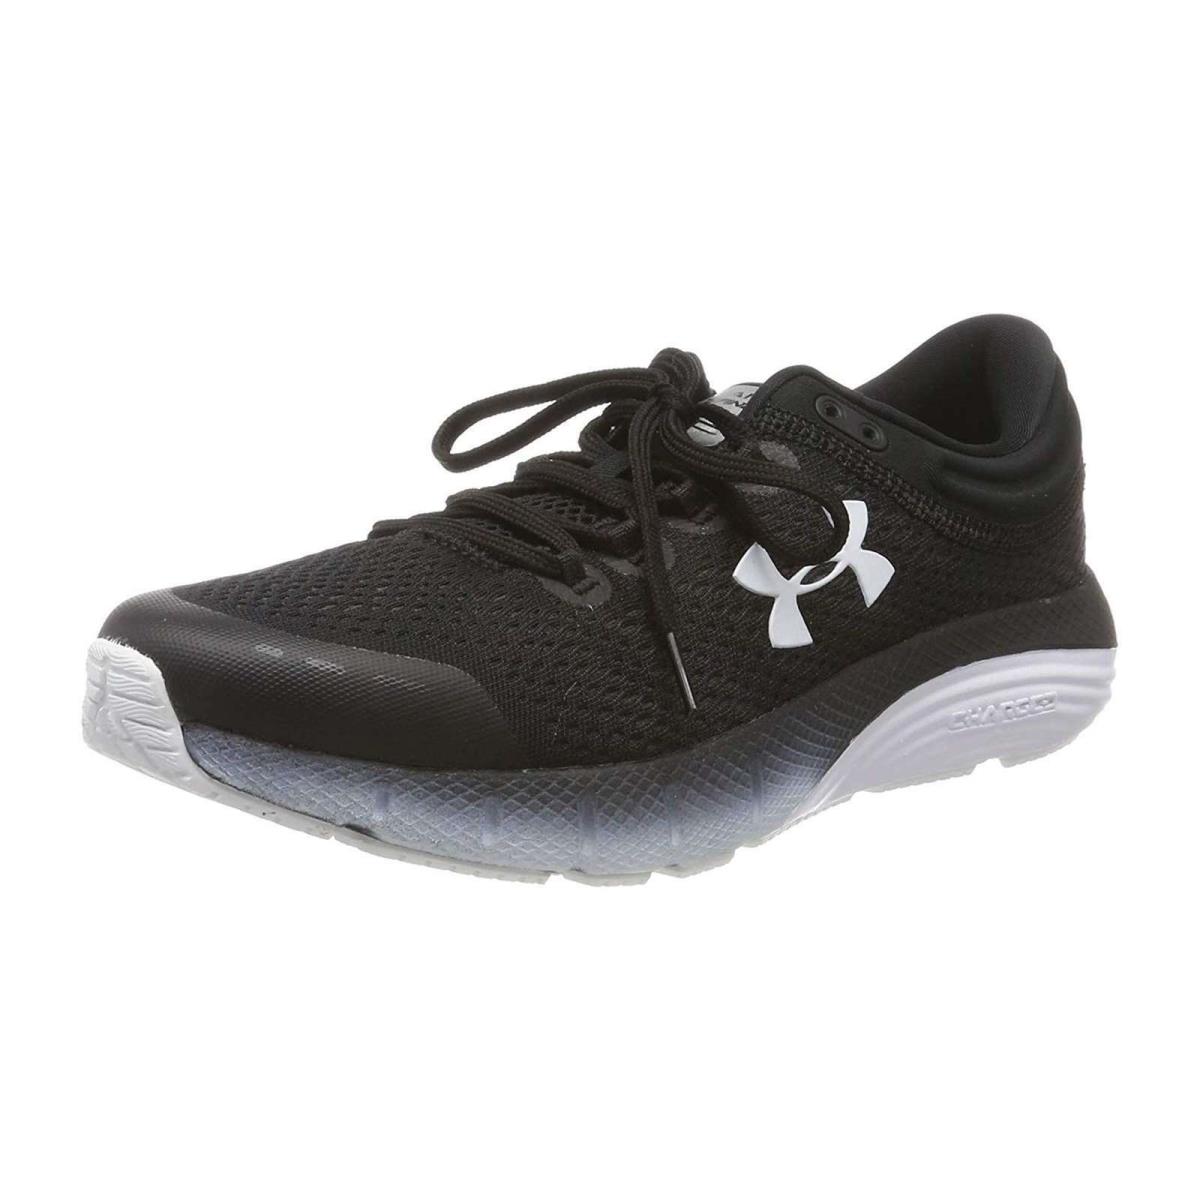 Under Armour Women s Athletic Sneakers Charged Bandit 5 Running Lace-up Shoes